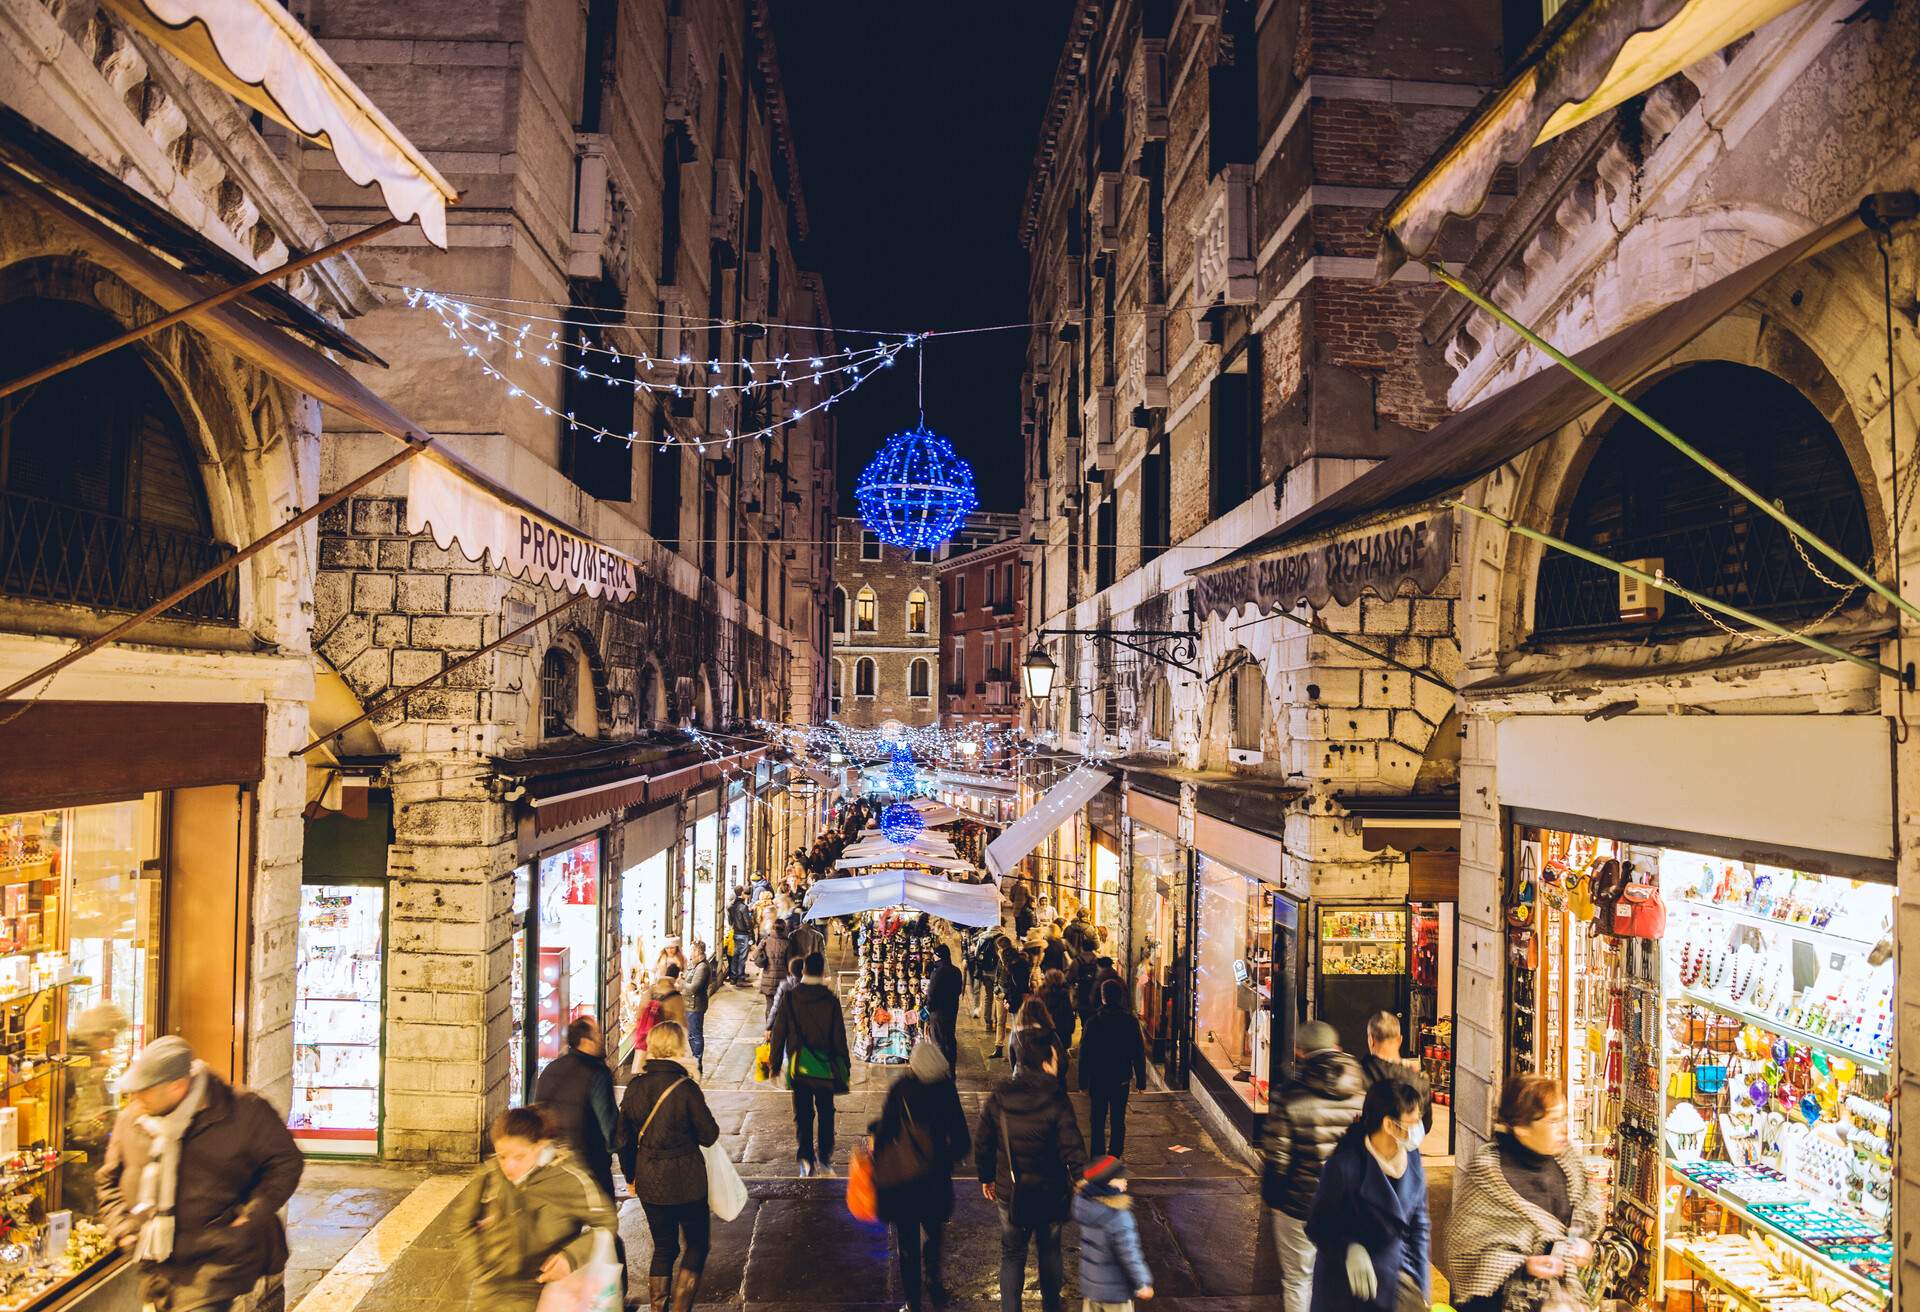 Street view of shops and Christmas lights in Venice, Italy